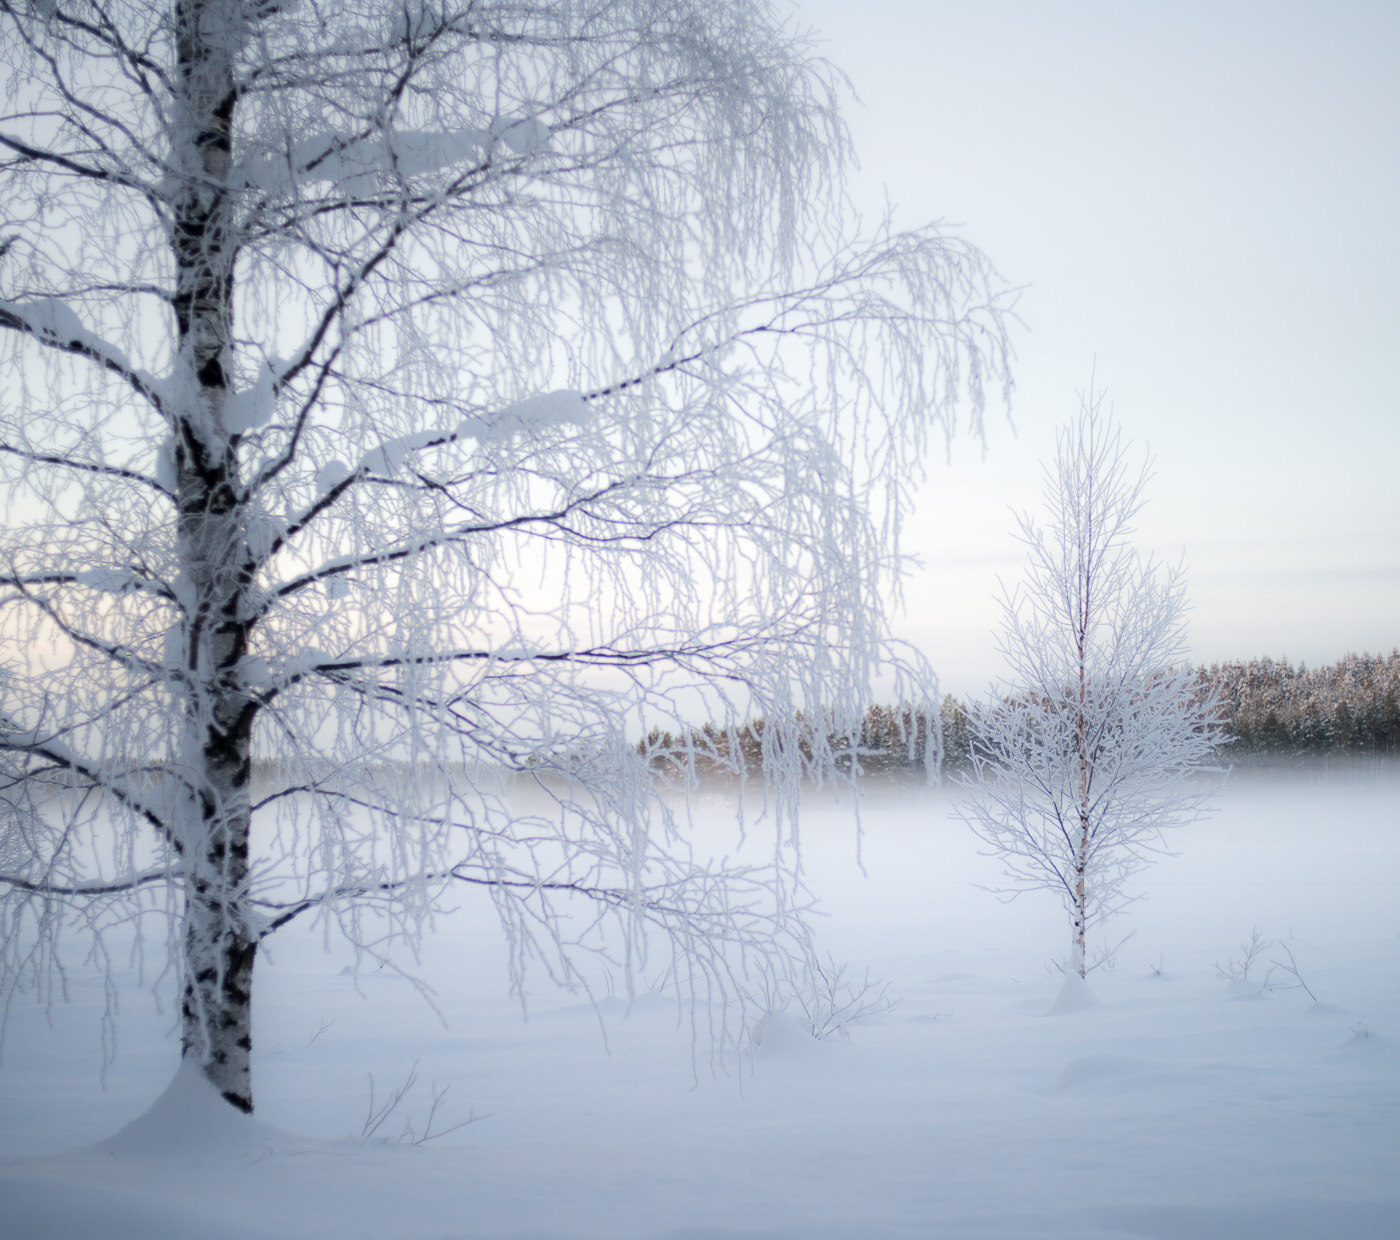 A pair of frosted trees at sunset in Lapland. Nikon D800e with Leica Summicron-R 35